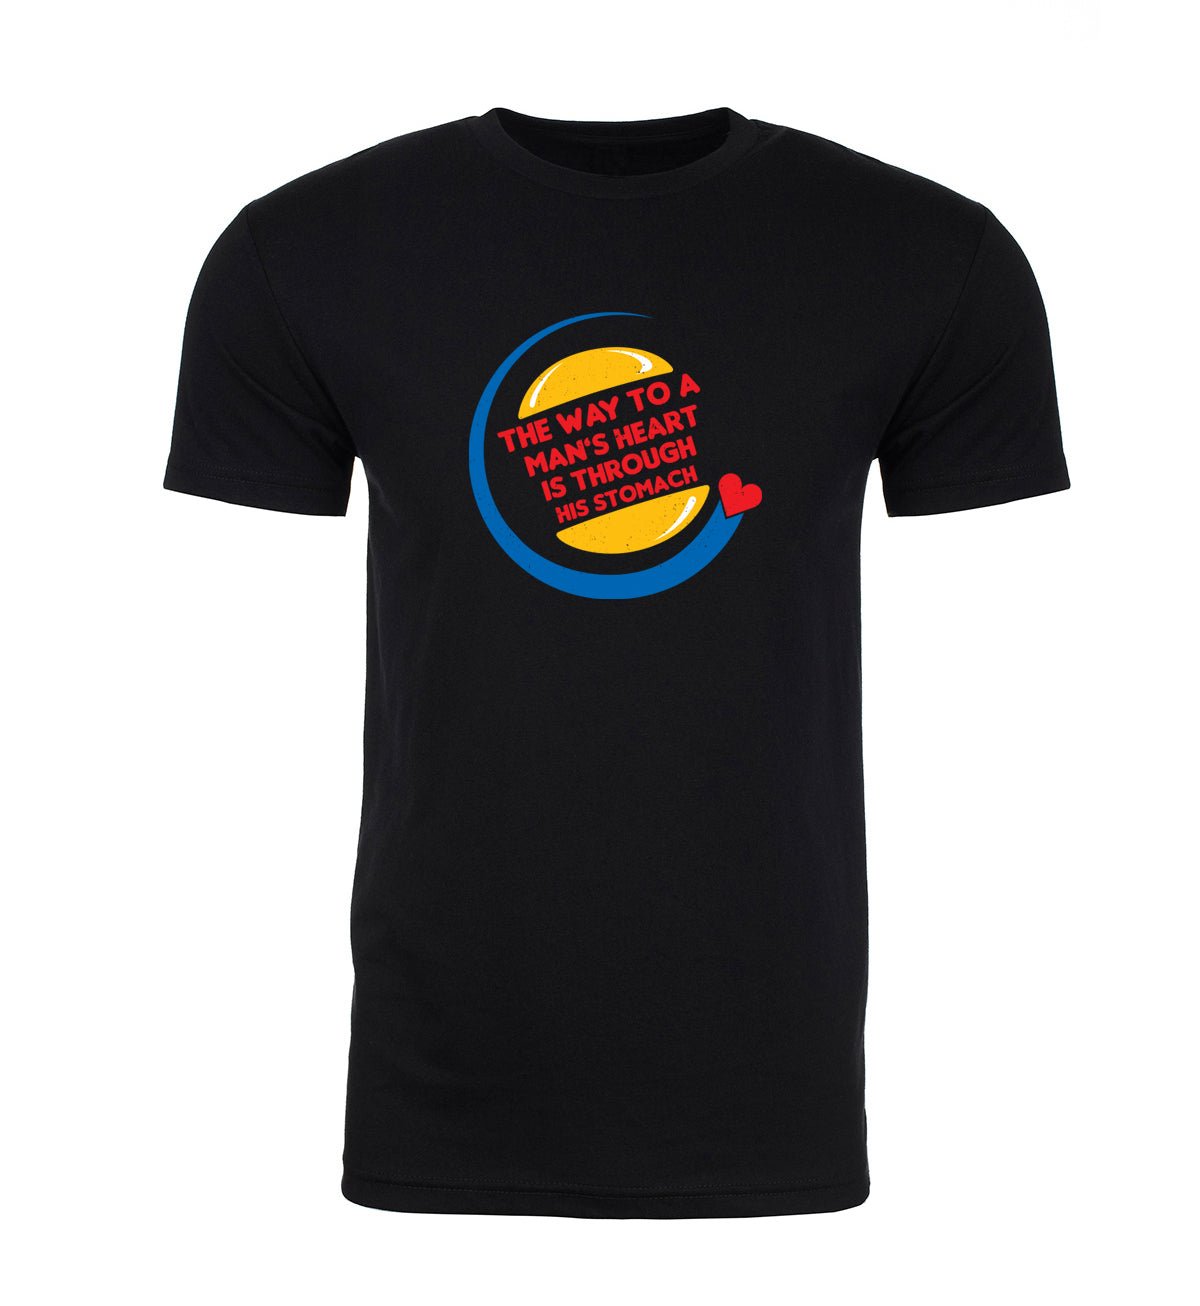 The Way to a Man's Heart Is Through His Stomach (King O Burgers) Mens T Shirts - Mato & Hash